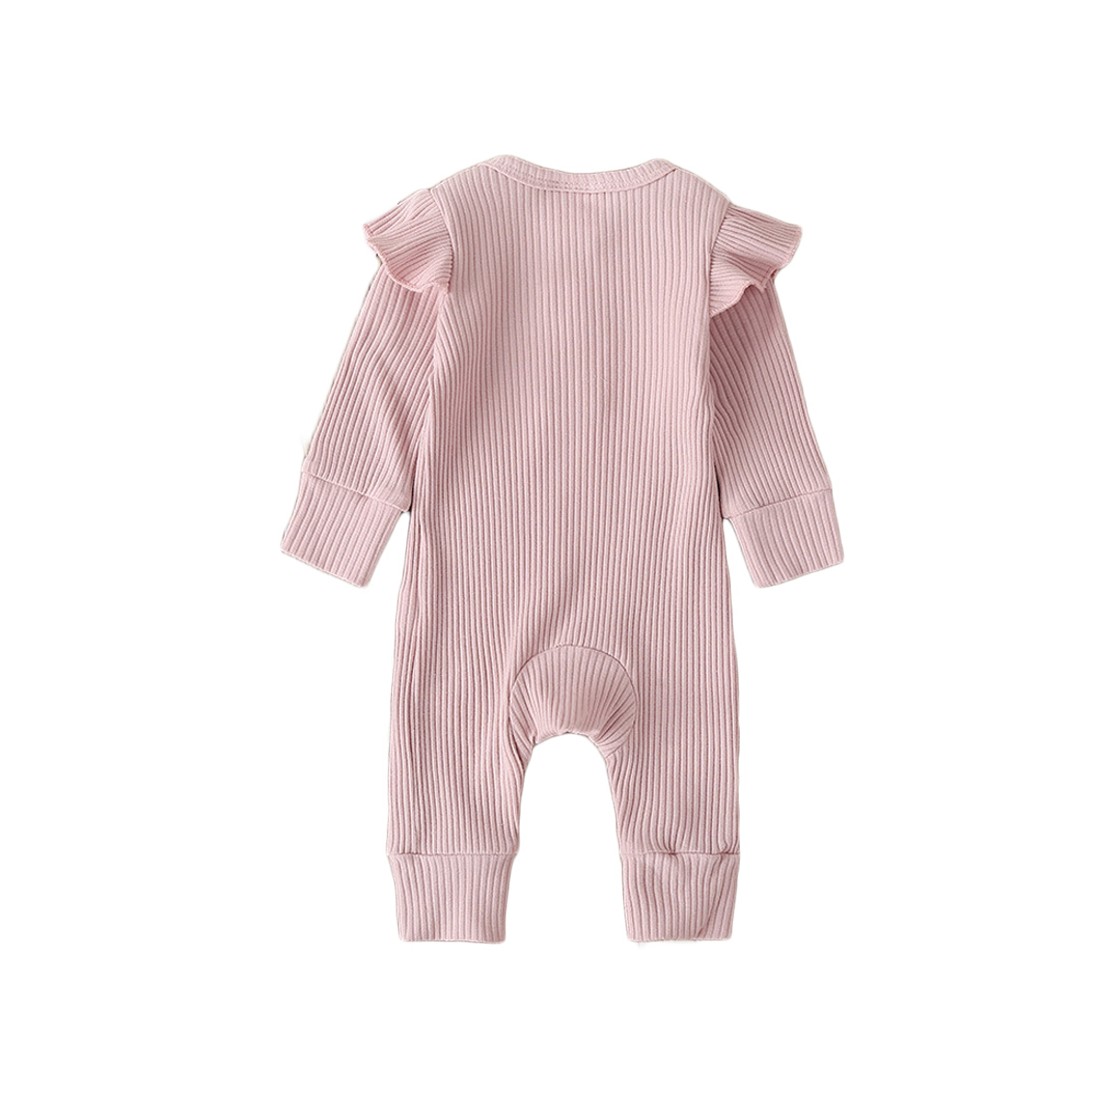 Freya - Luxury Frilly Ribbed Pink Baby Romper